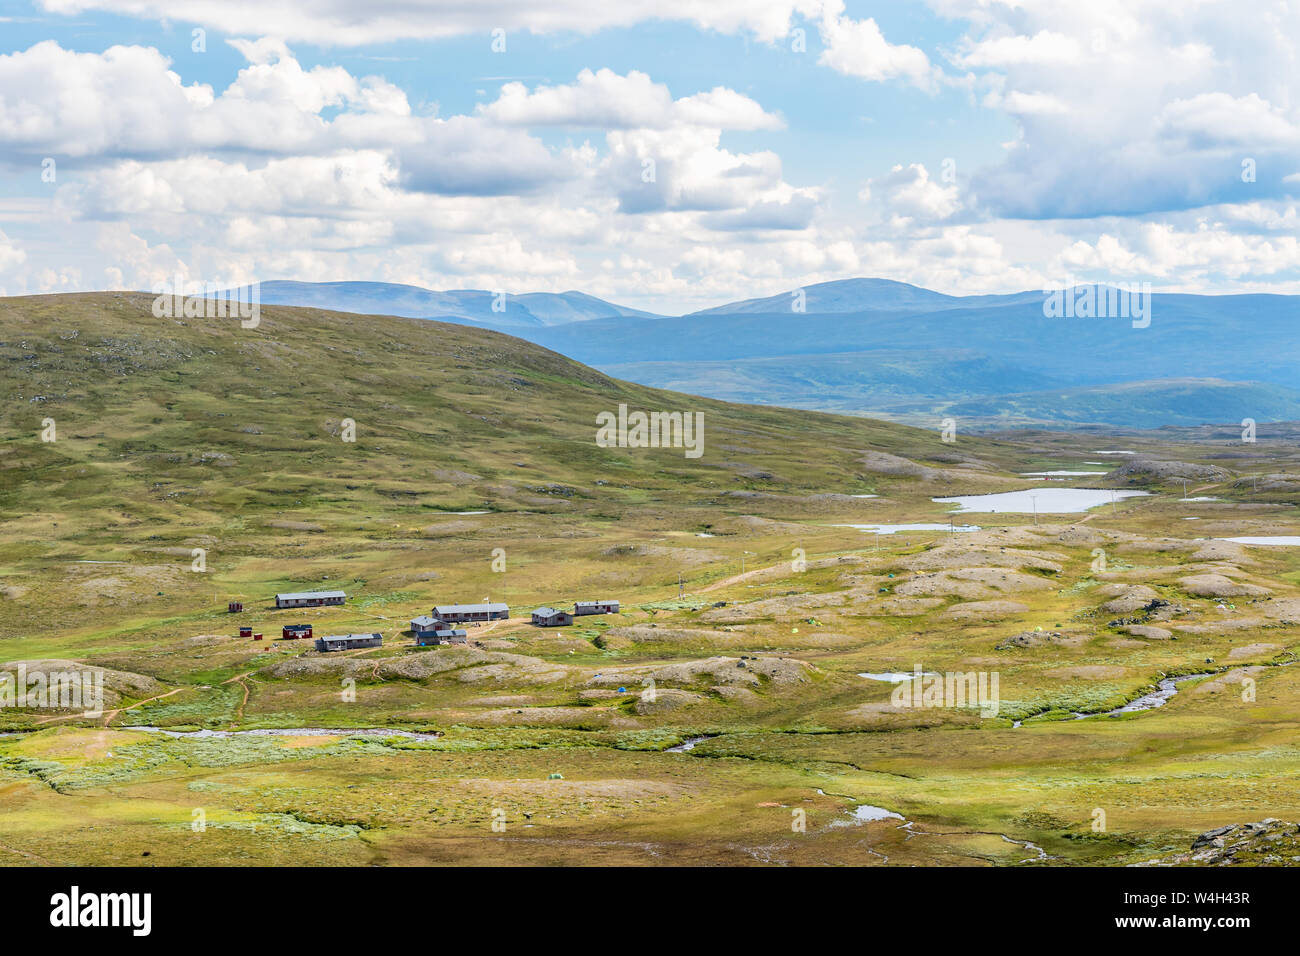 Helags mountain lodge in the swedish mountains Stock Photo